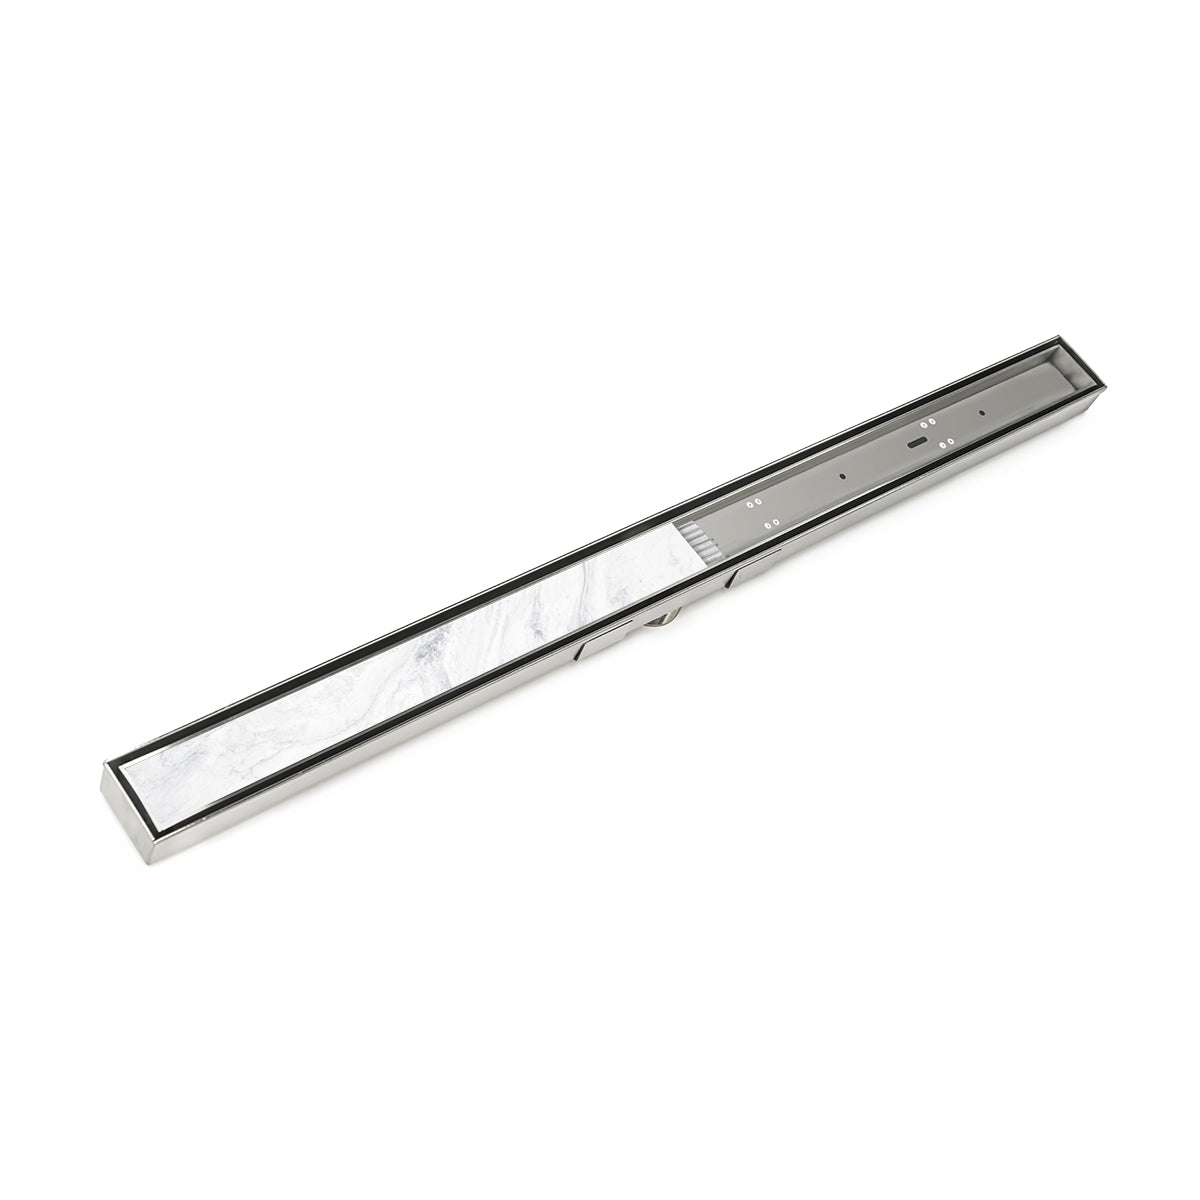 Infinity Drain 72" S-Stainless Steel Series High Flow Site Sizable Linear Drain Kit with Low Profile Tile Insert Frame with ABS Drain Body, 3" Outlet